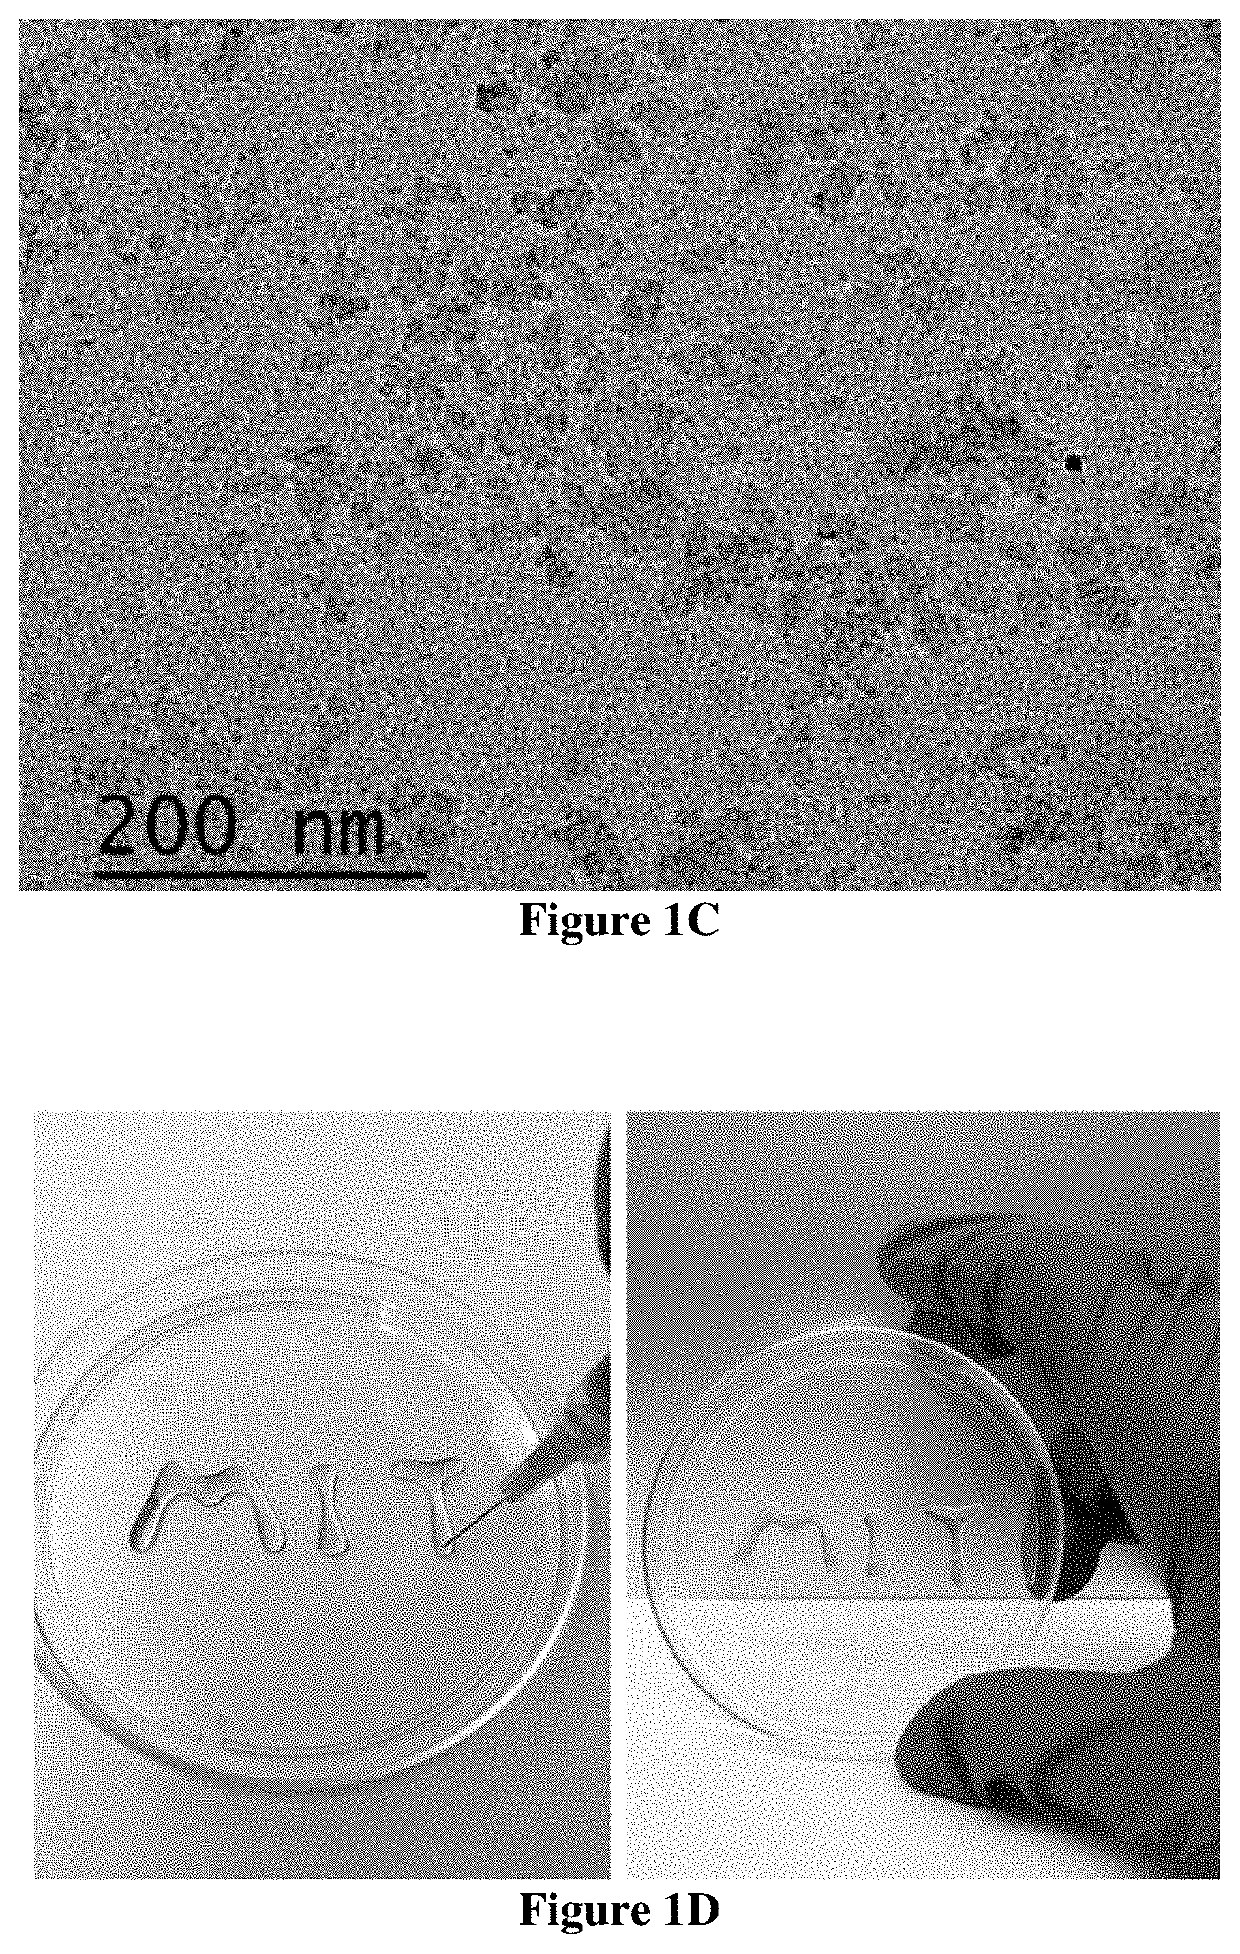 Injectable shear-thinning hydrogels and uses thereof